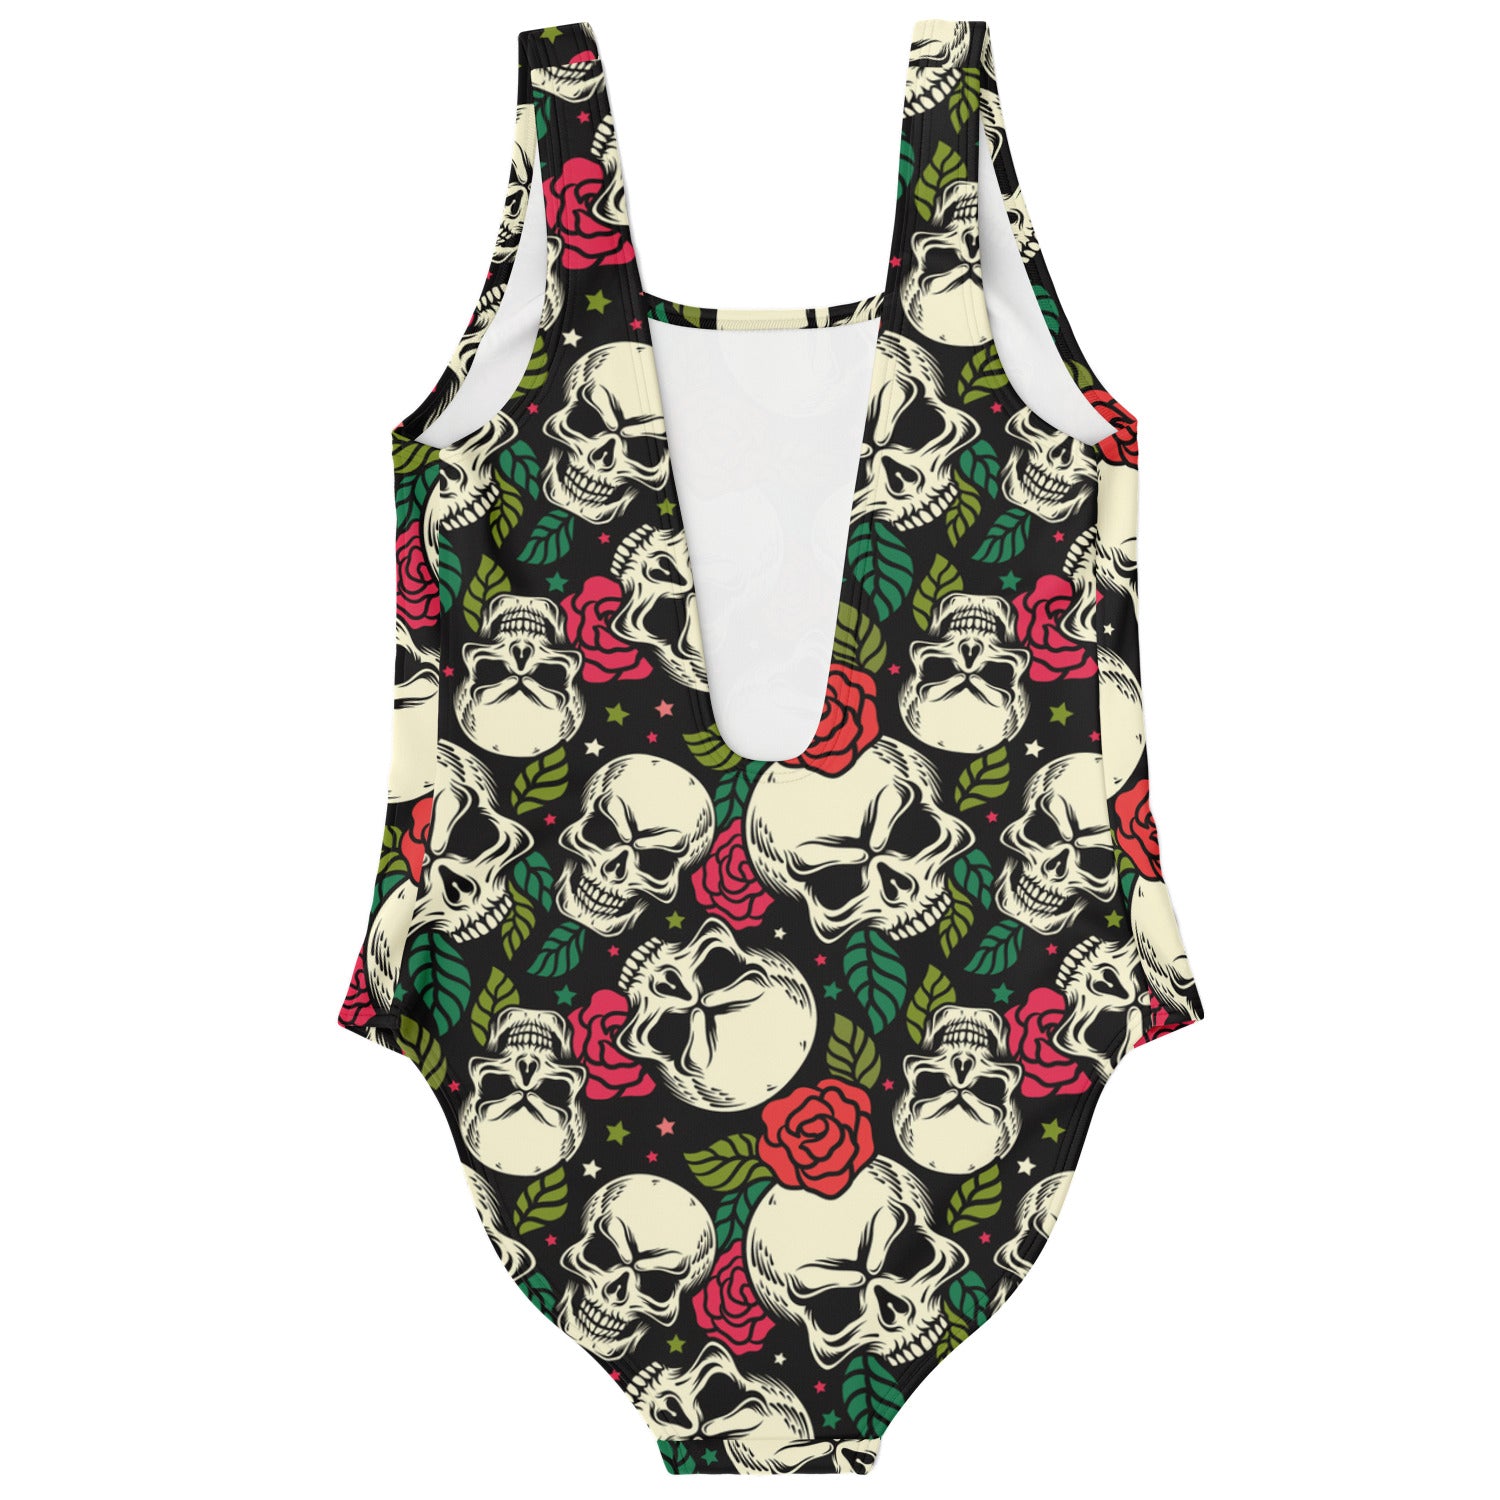 Skull and roses one piece swimsuit